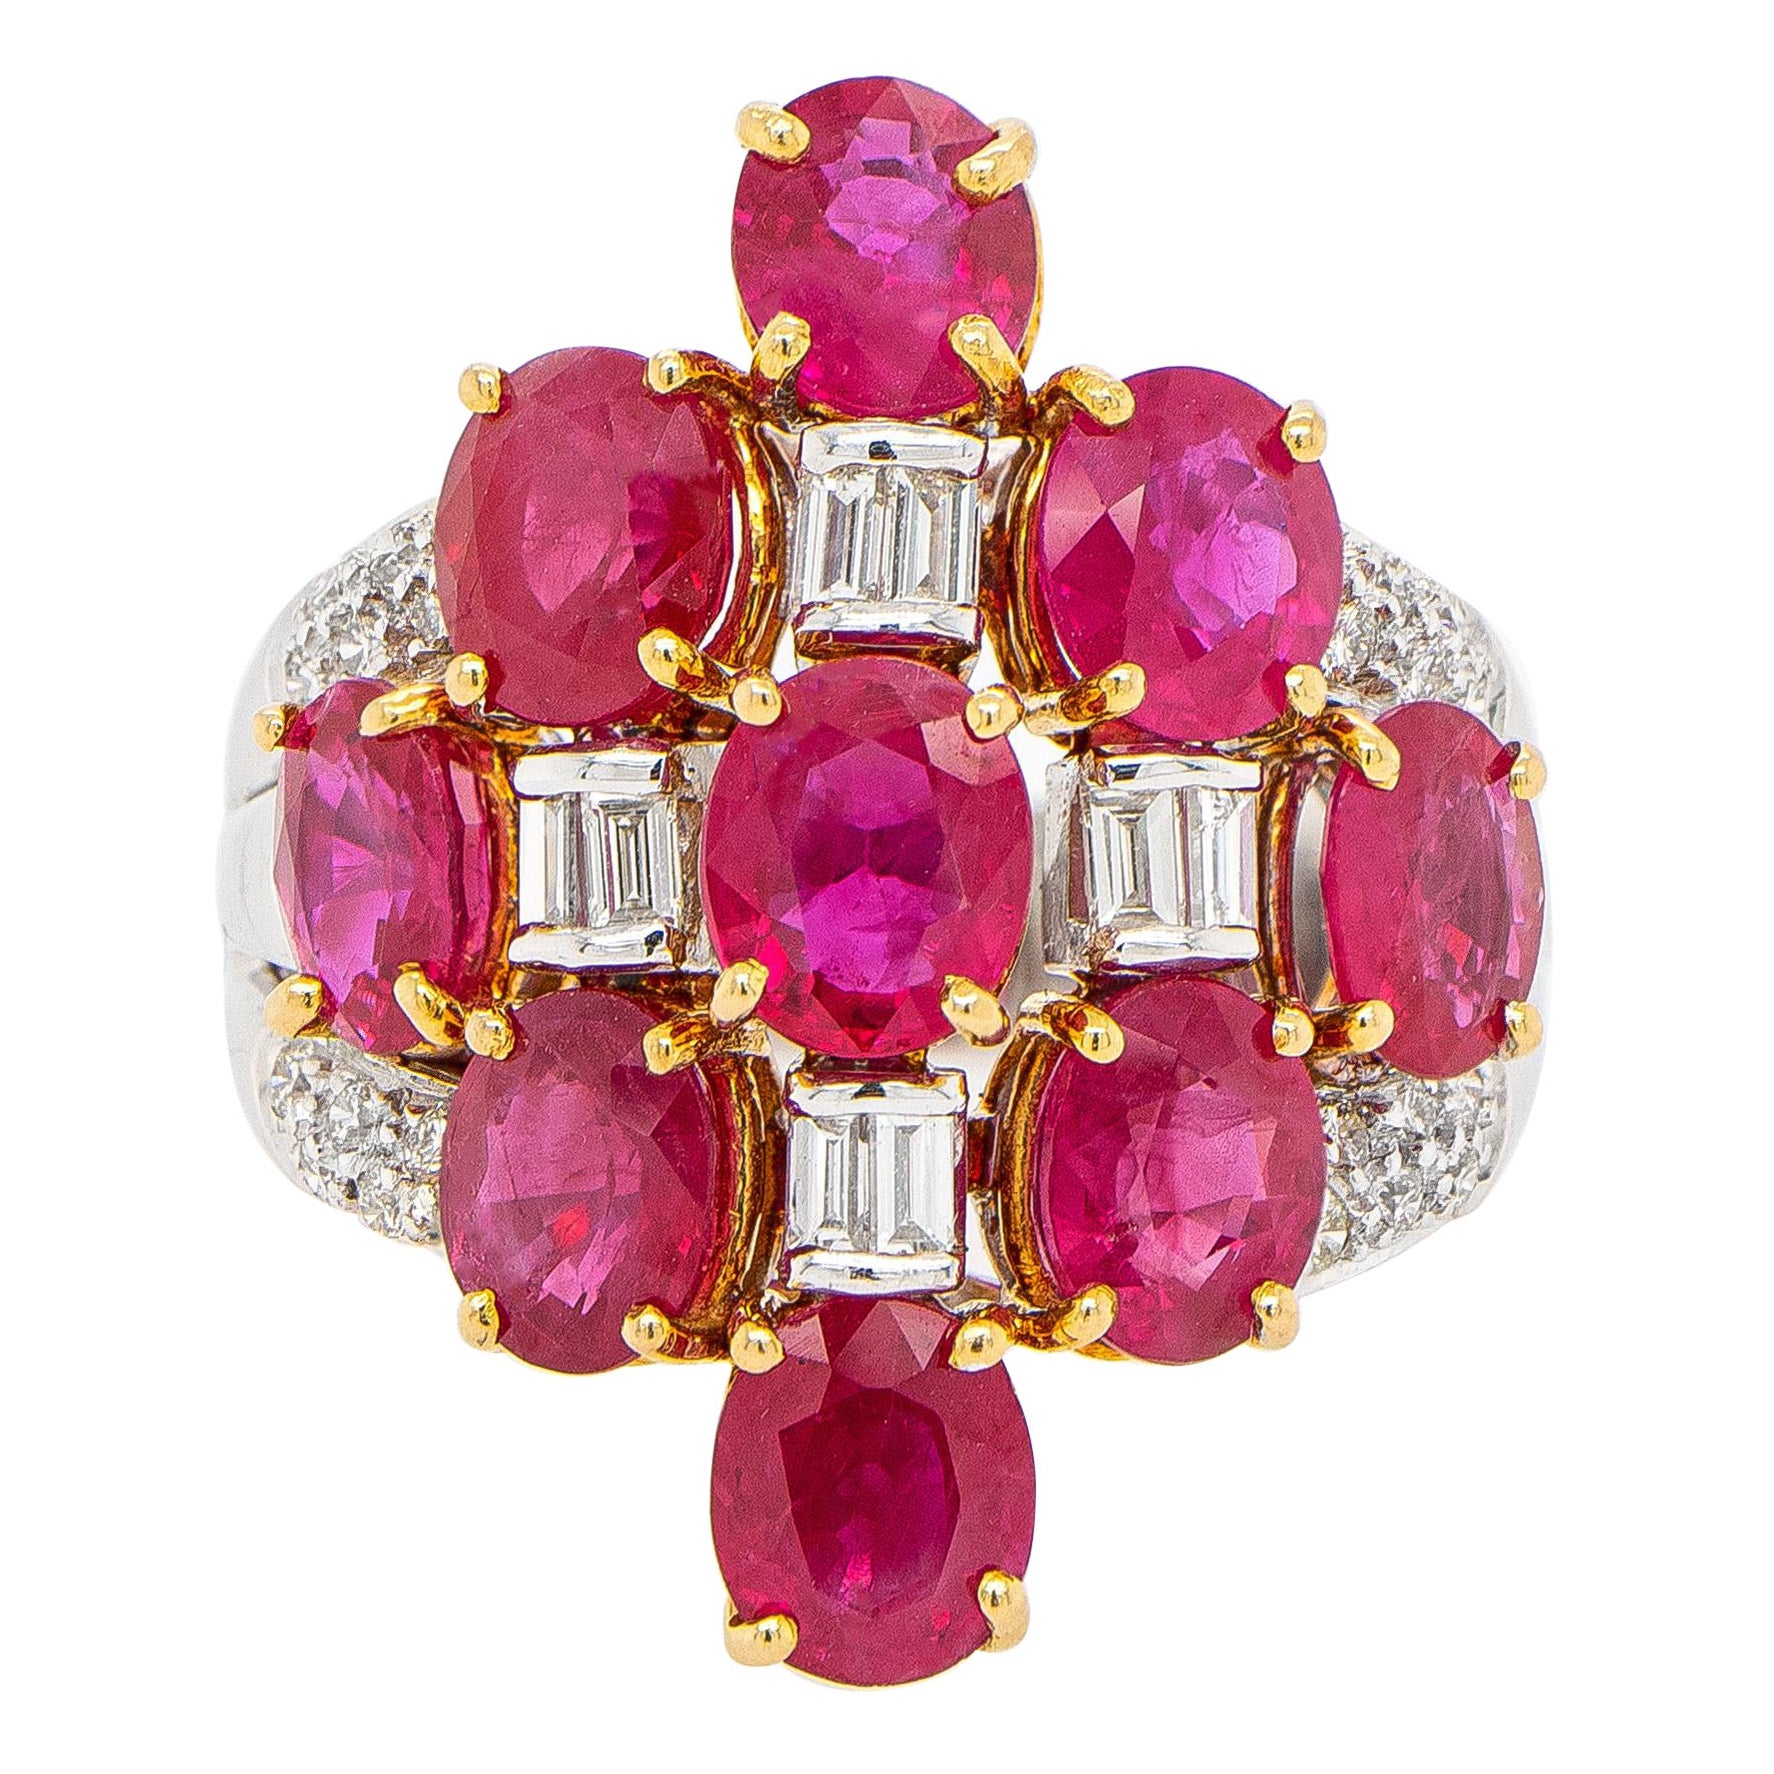 Art Deco Ring Oval Rubies 7.04 Carats and Diamonds 18k Gold